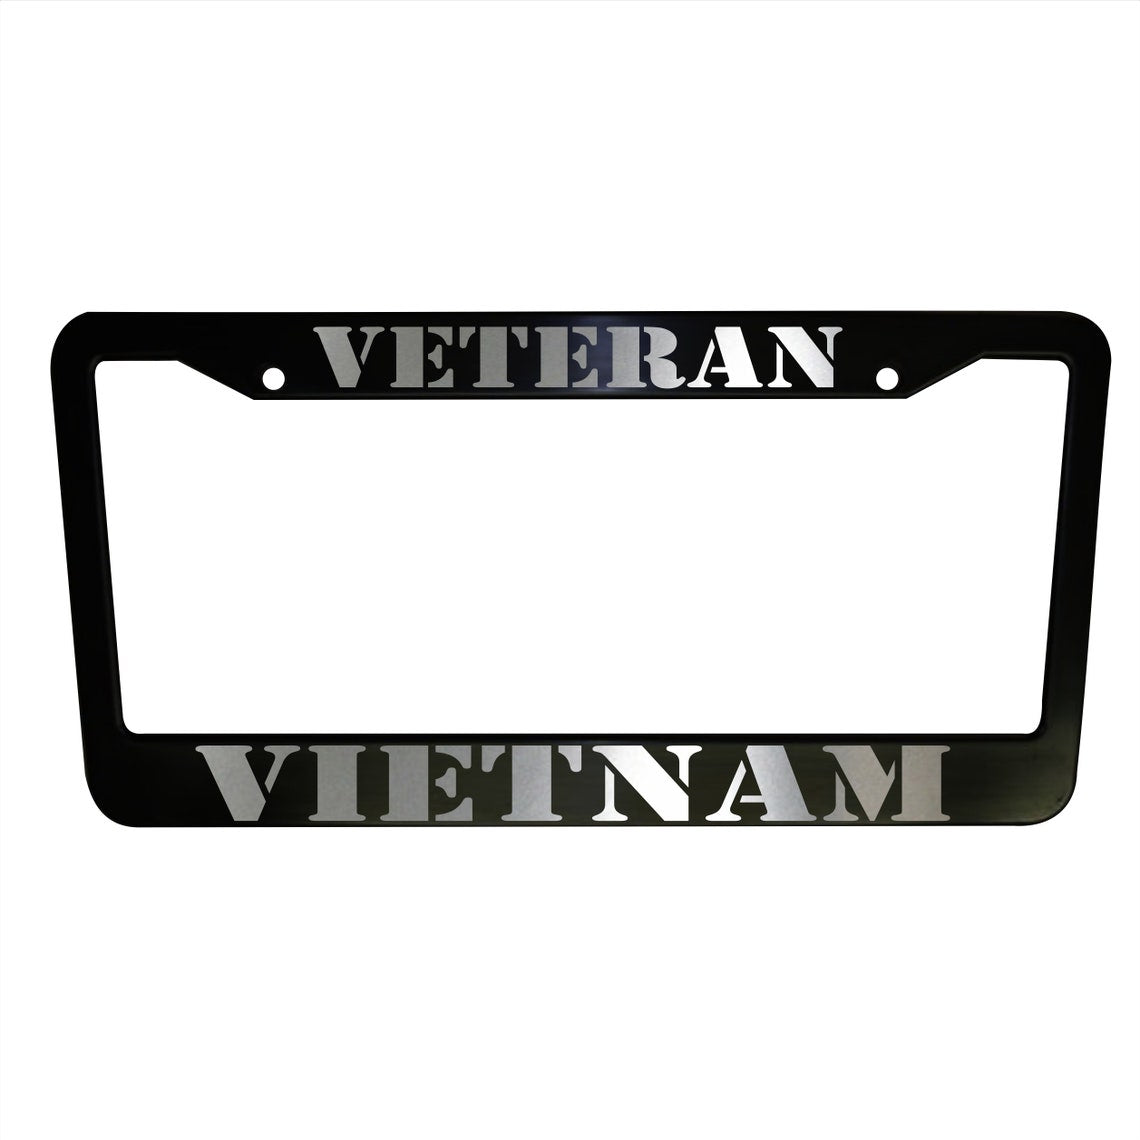 SET of 2 - Vietnam Veteran Army USA Black Plastic or Aluminum License Plate Frames Truck Car Van Décor Accessories New Vehicle Gifts Holders